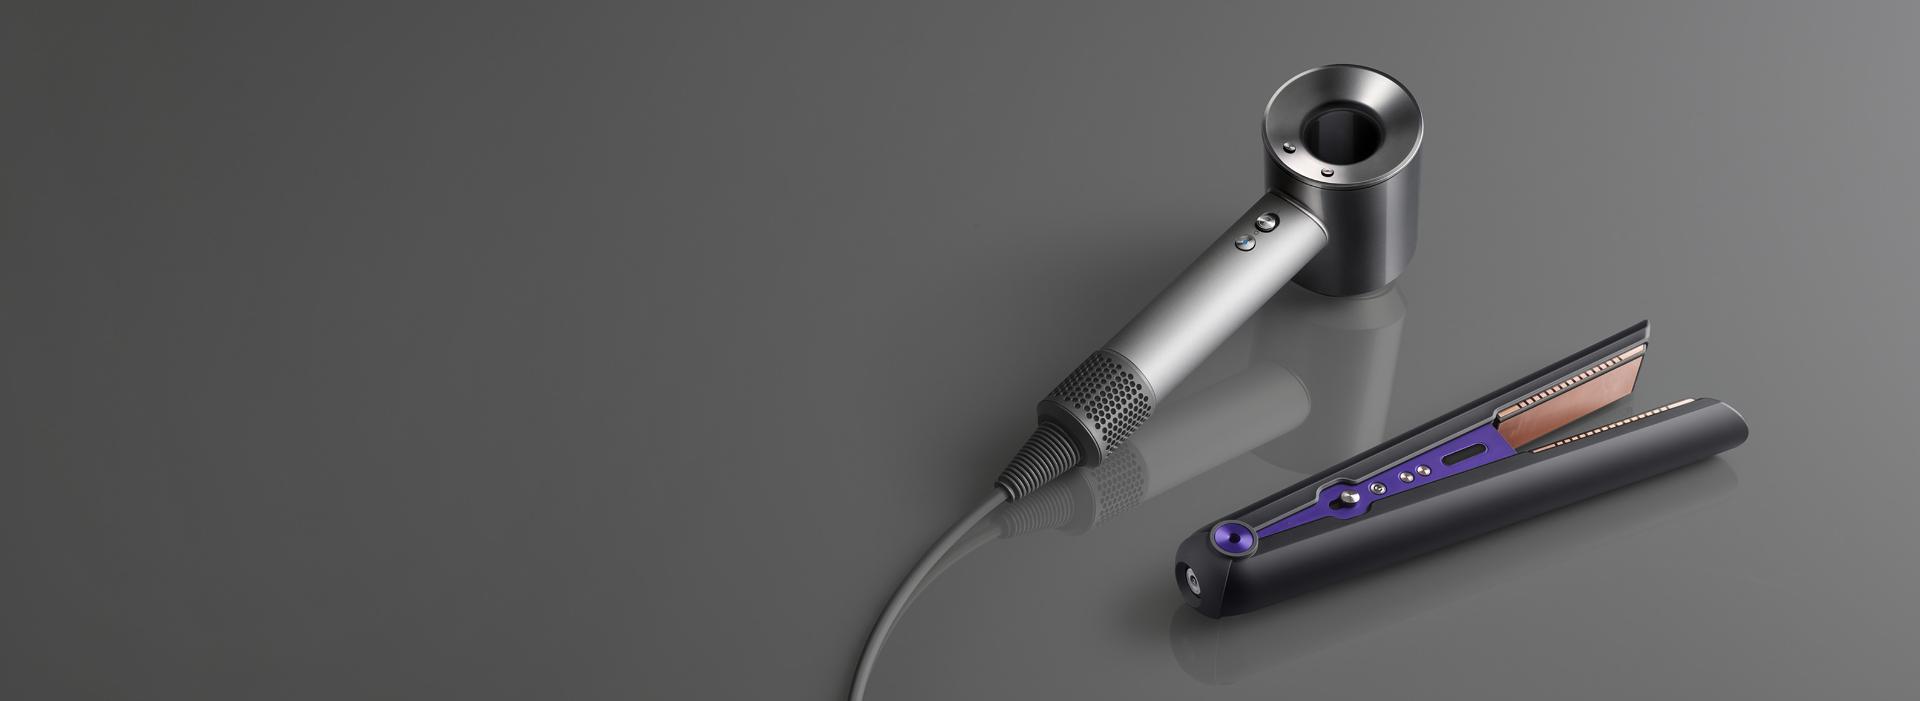 The selection of Dyson professional hair care machines